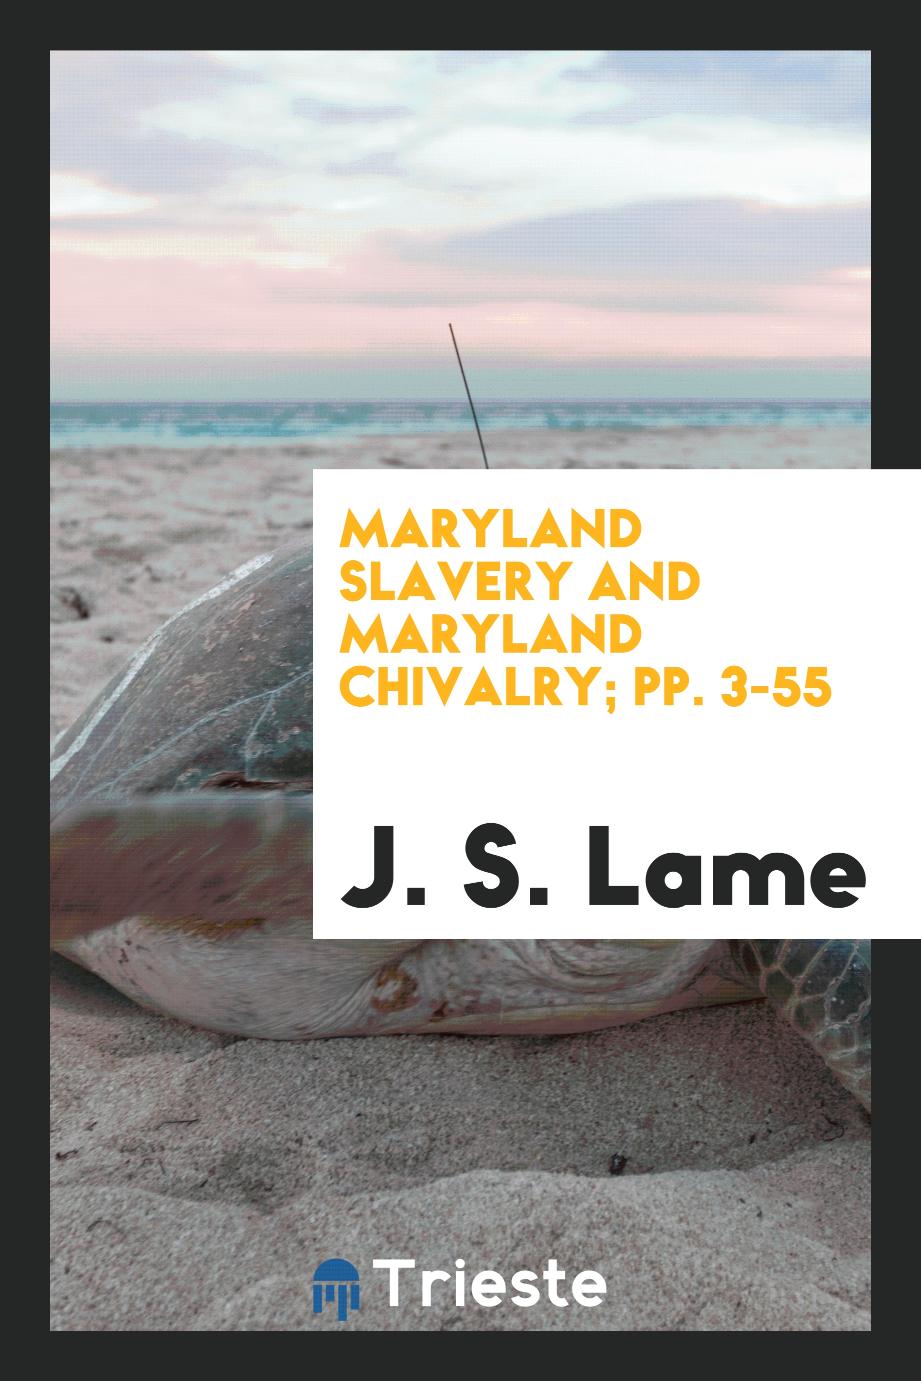 Maryland Slavery and Maryland Chivalry; pp. 3-55